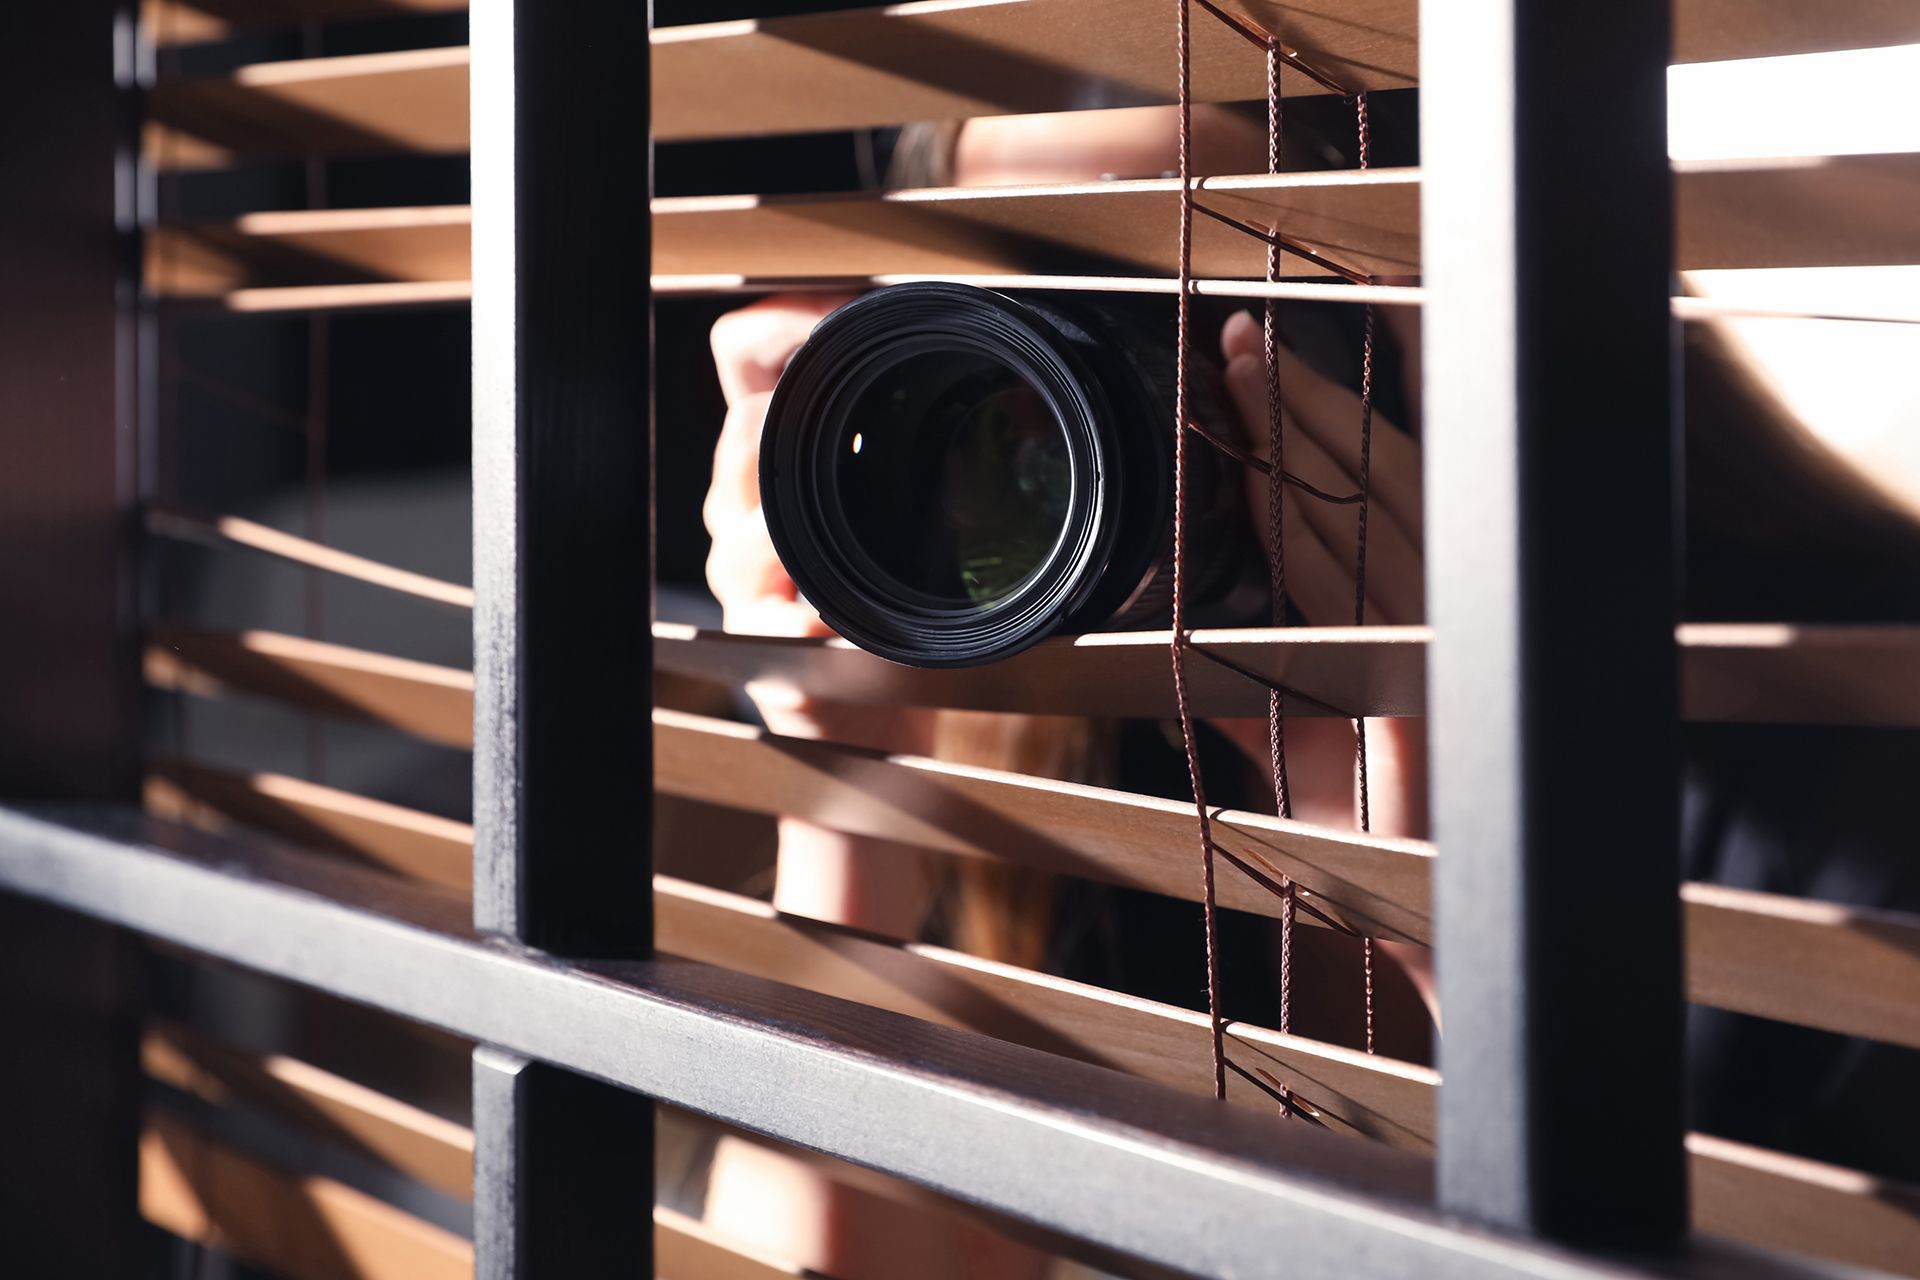 A Person Is Holding a Camera and Looking Through Blinds